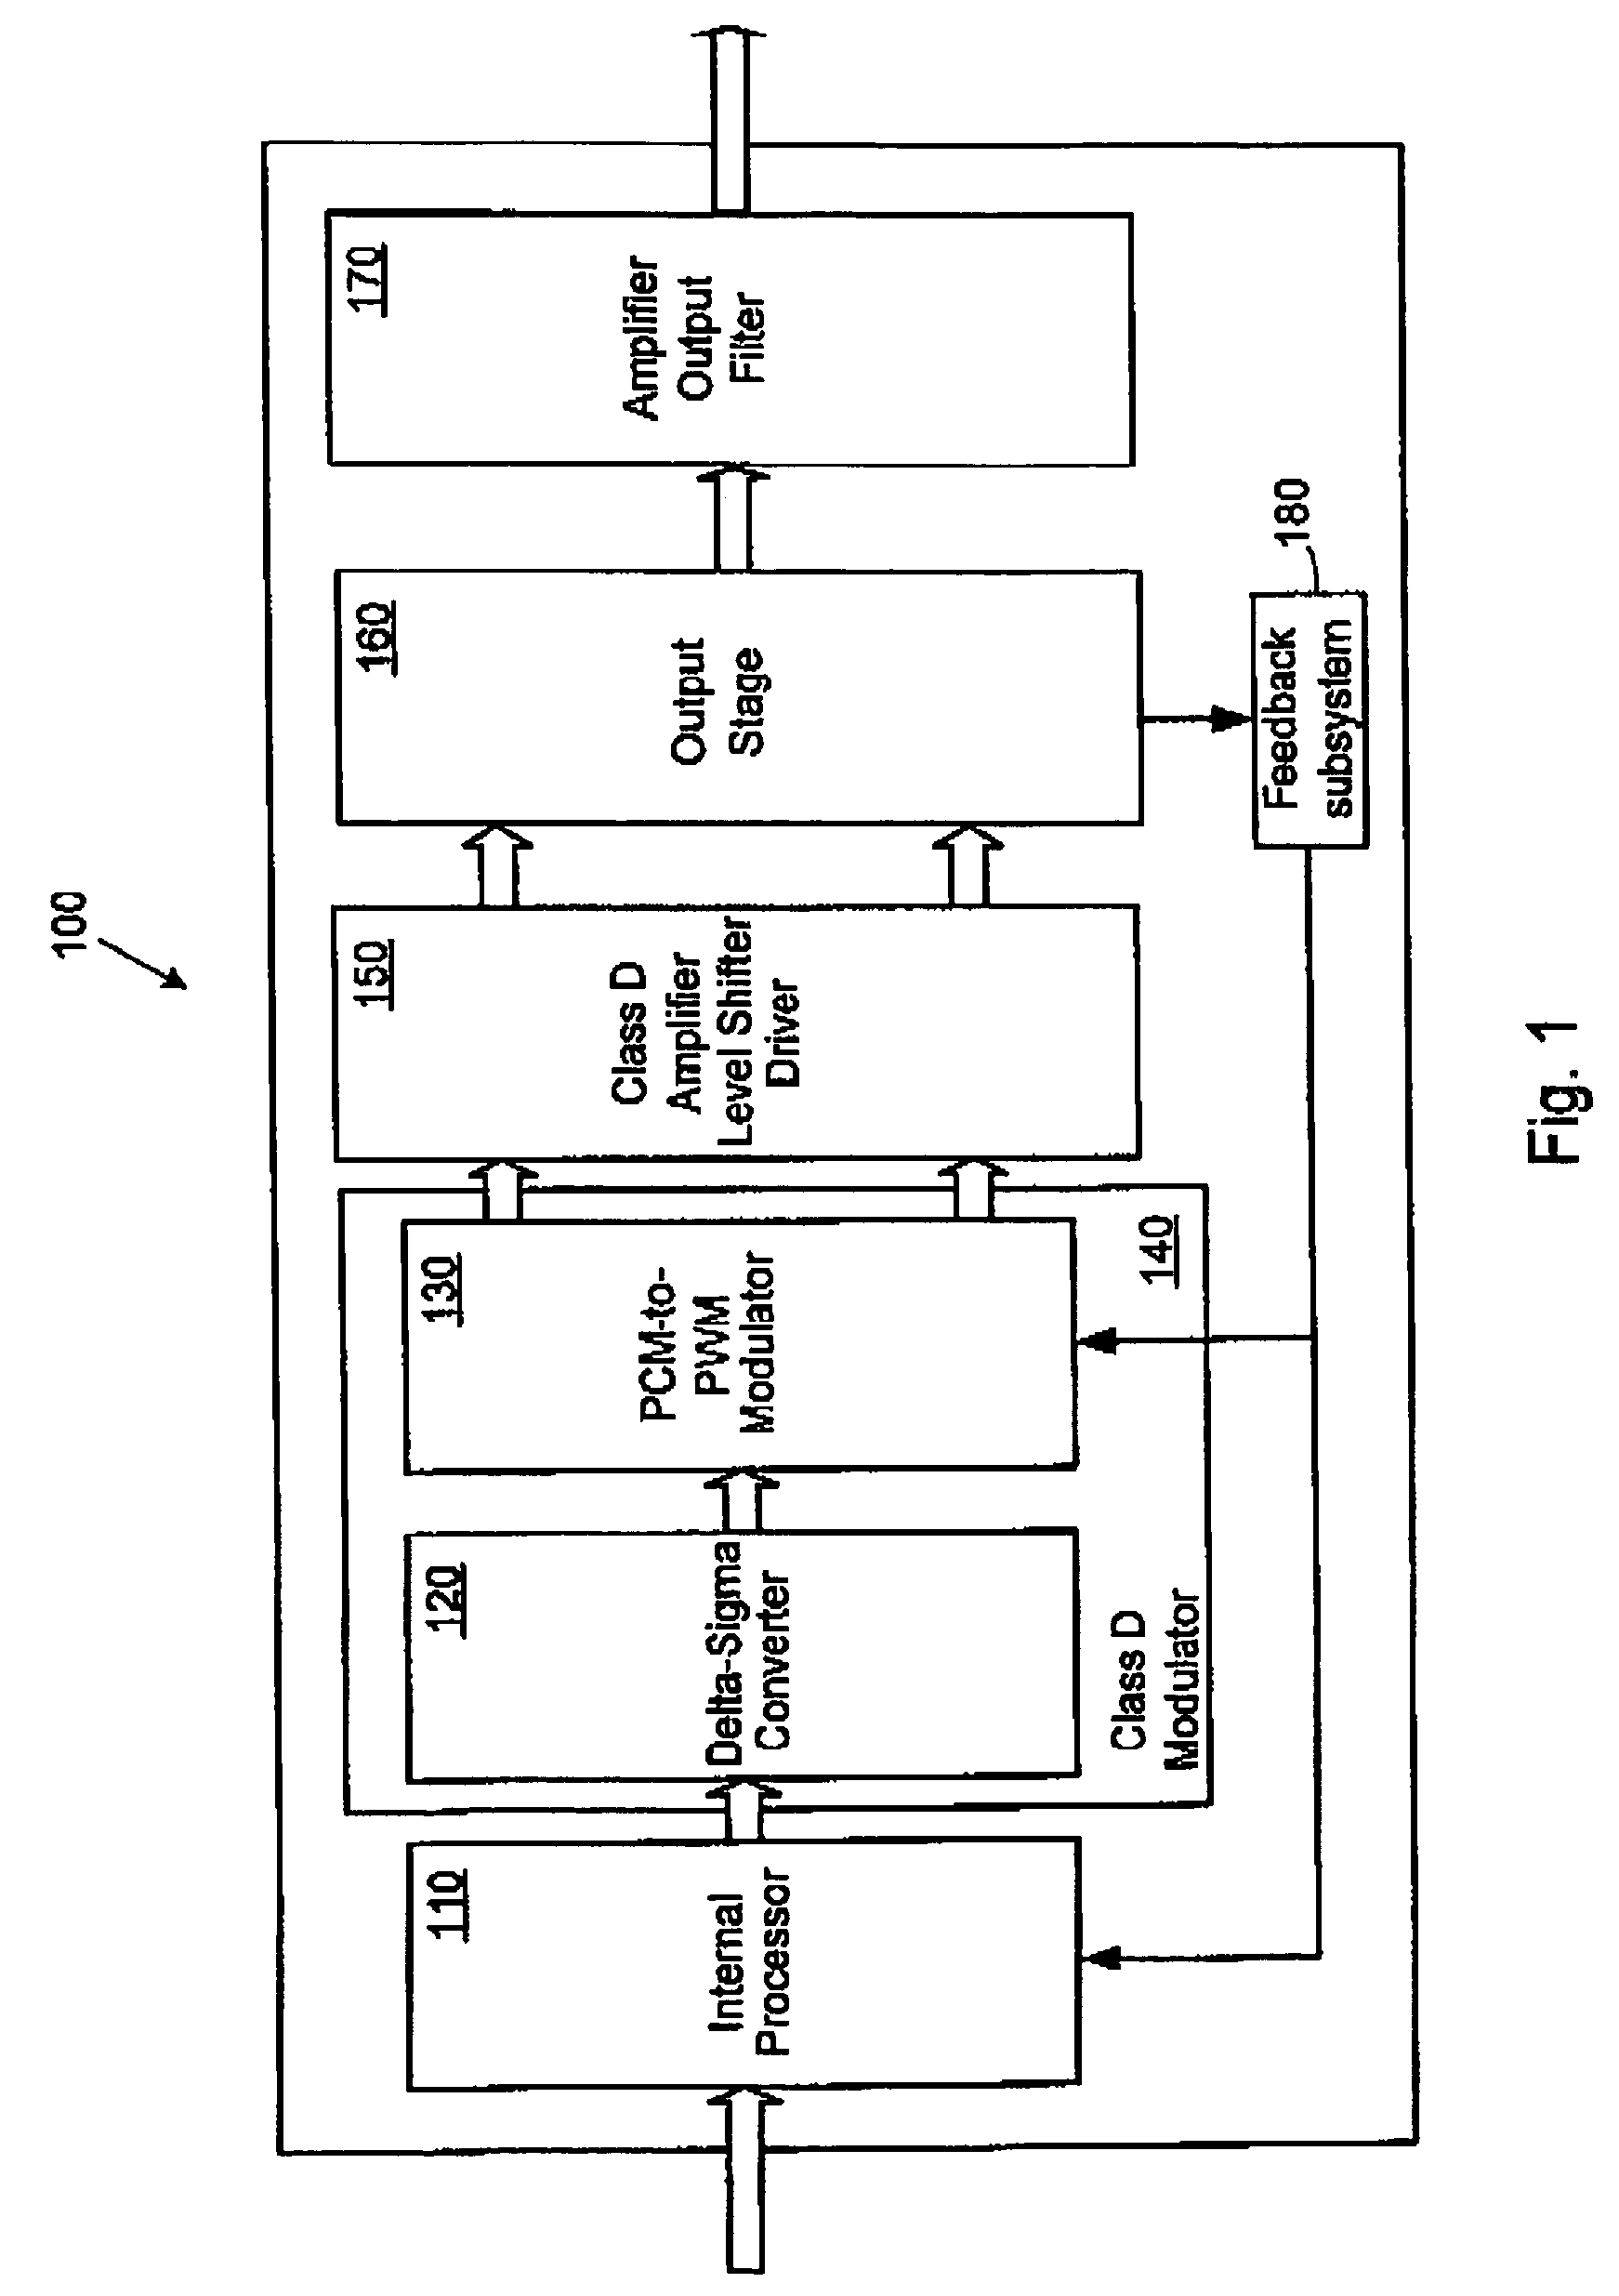 Systems and methods for automatically adjusting channel timing